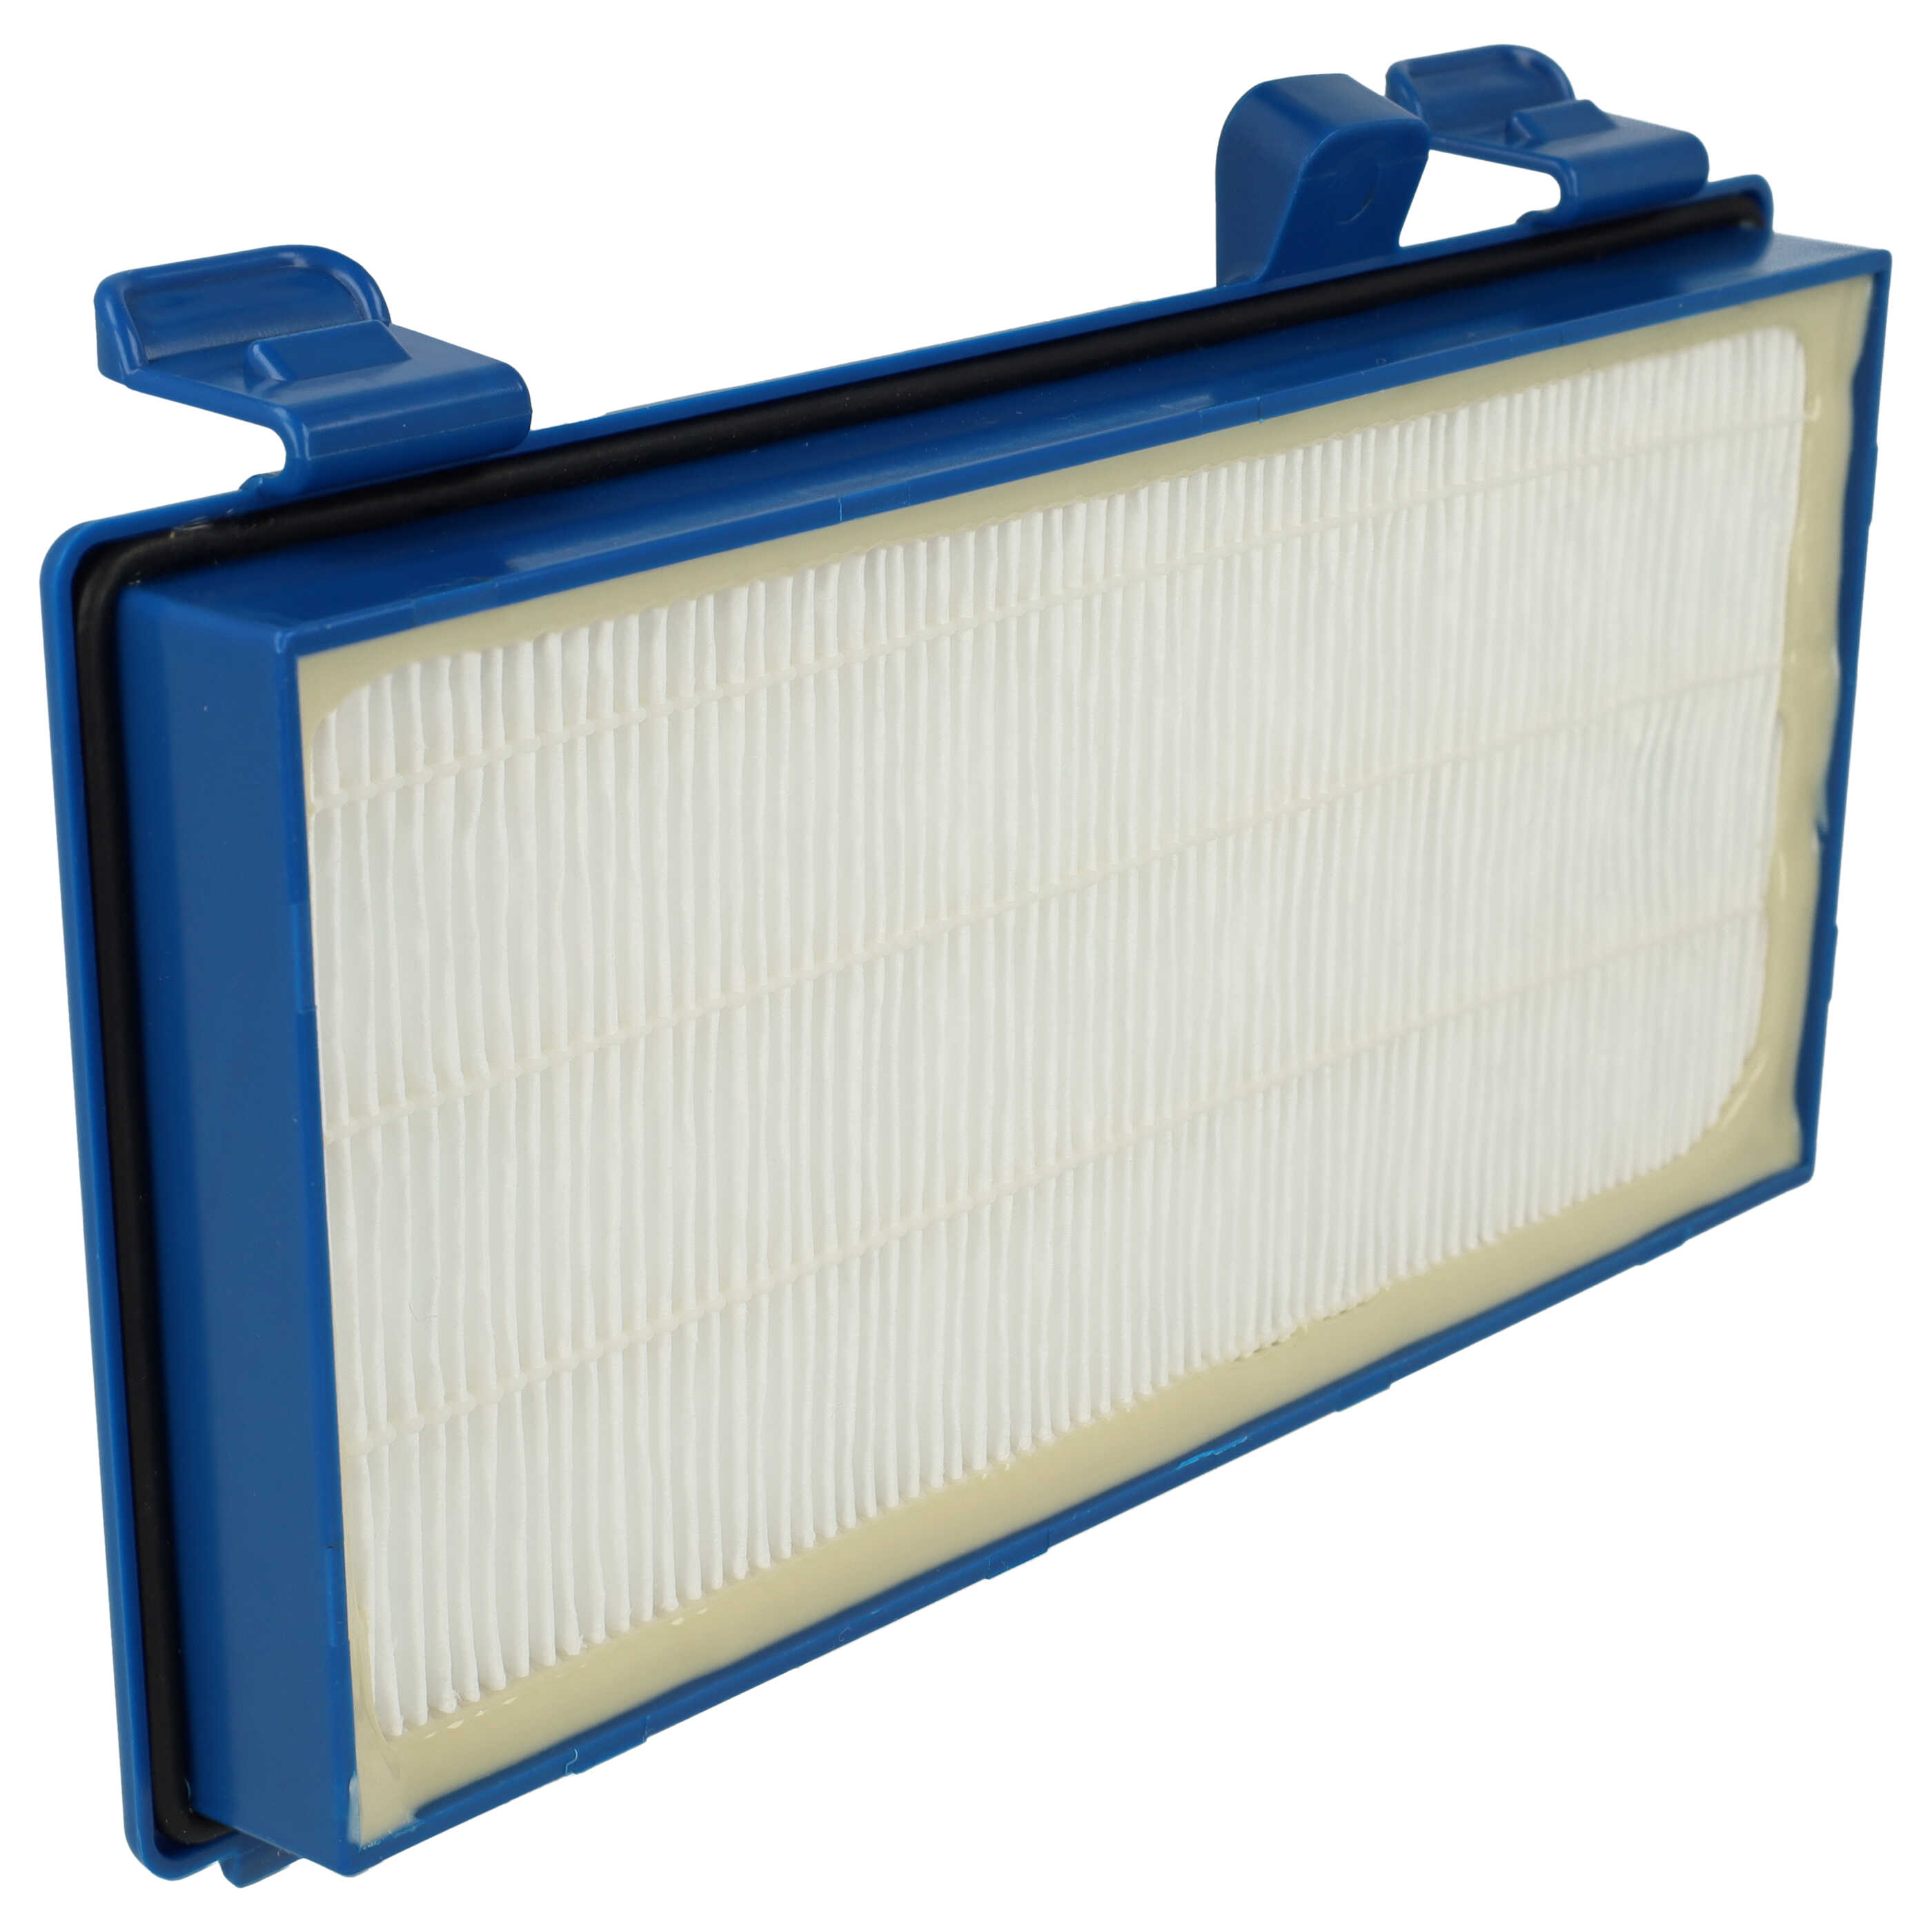 1x HEPA filter replaces Rowenta RS-RT3931, ZR902301 for Rowenta Vacuum Cleaner